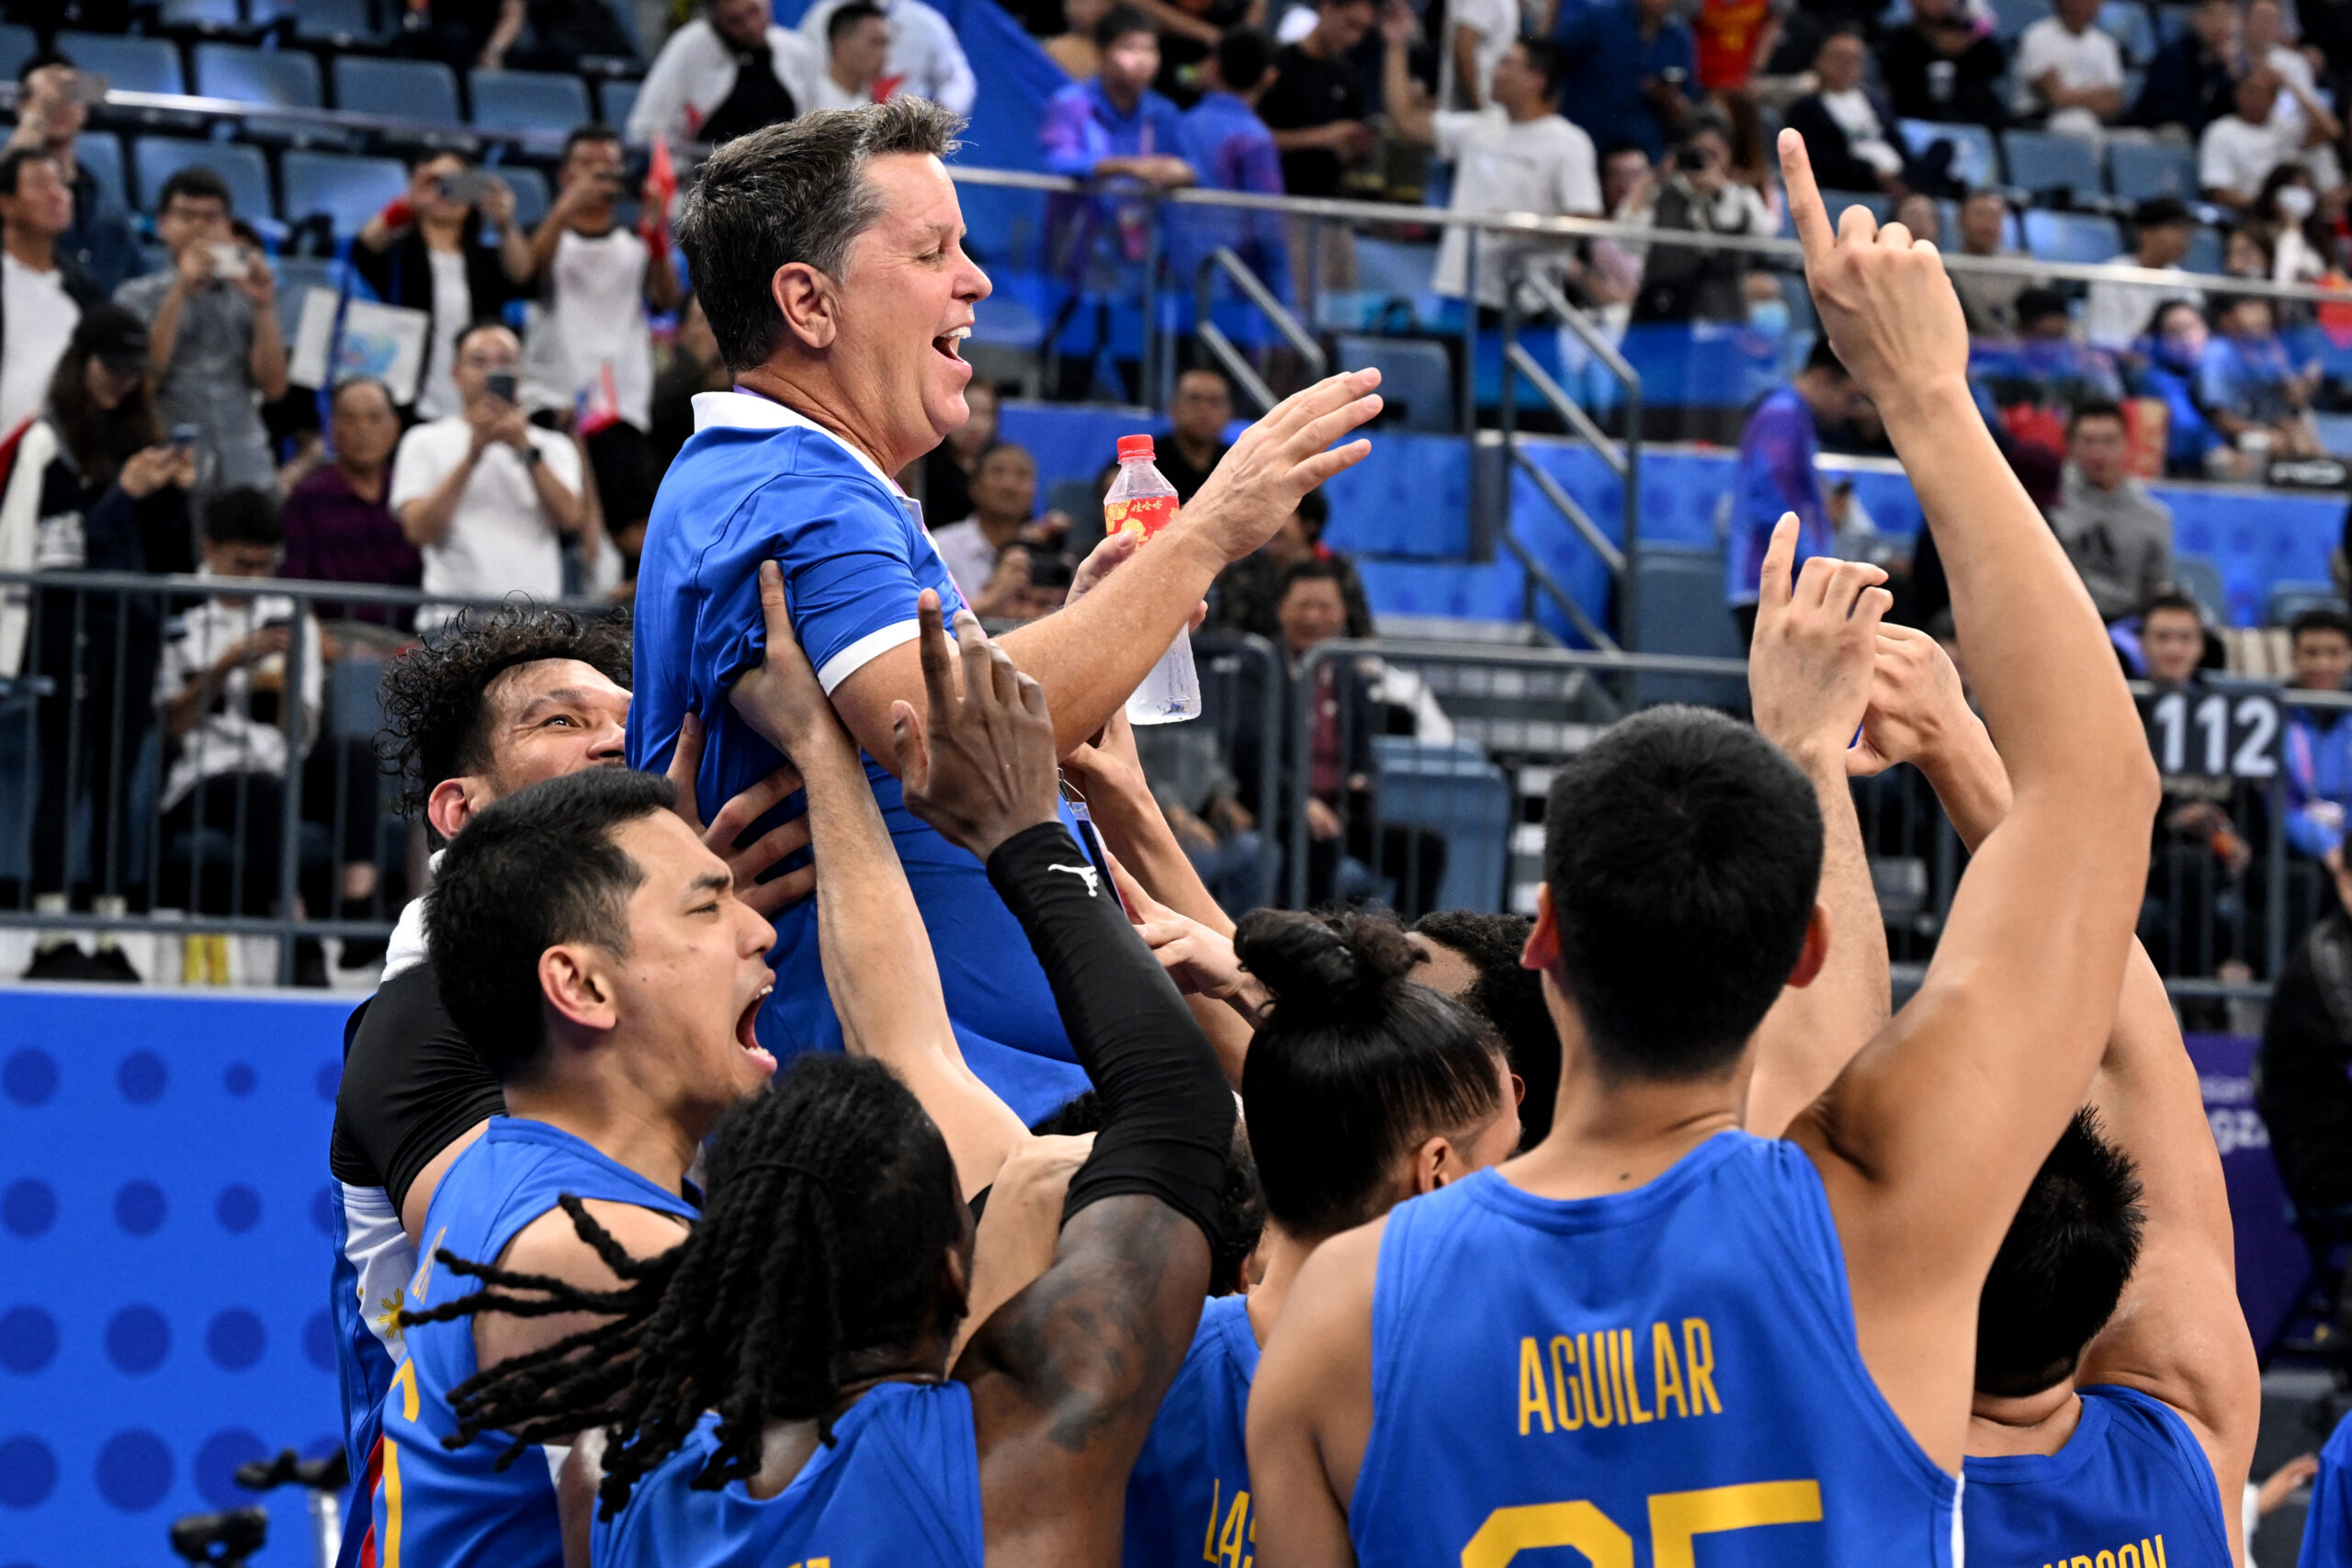 Coach Tim Cone gets the traditional celebratory ride from his players after the Philippines won the gold medal over Jordan in the men’s basketball final of the Asian Games. —AFP 